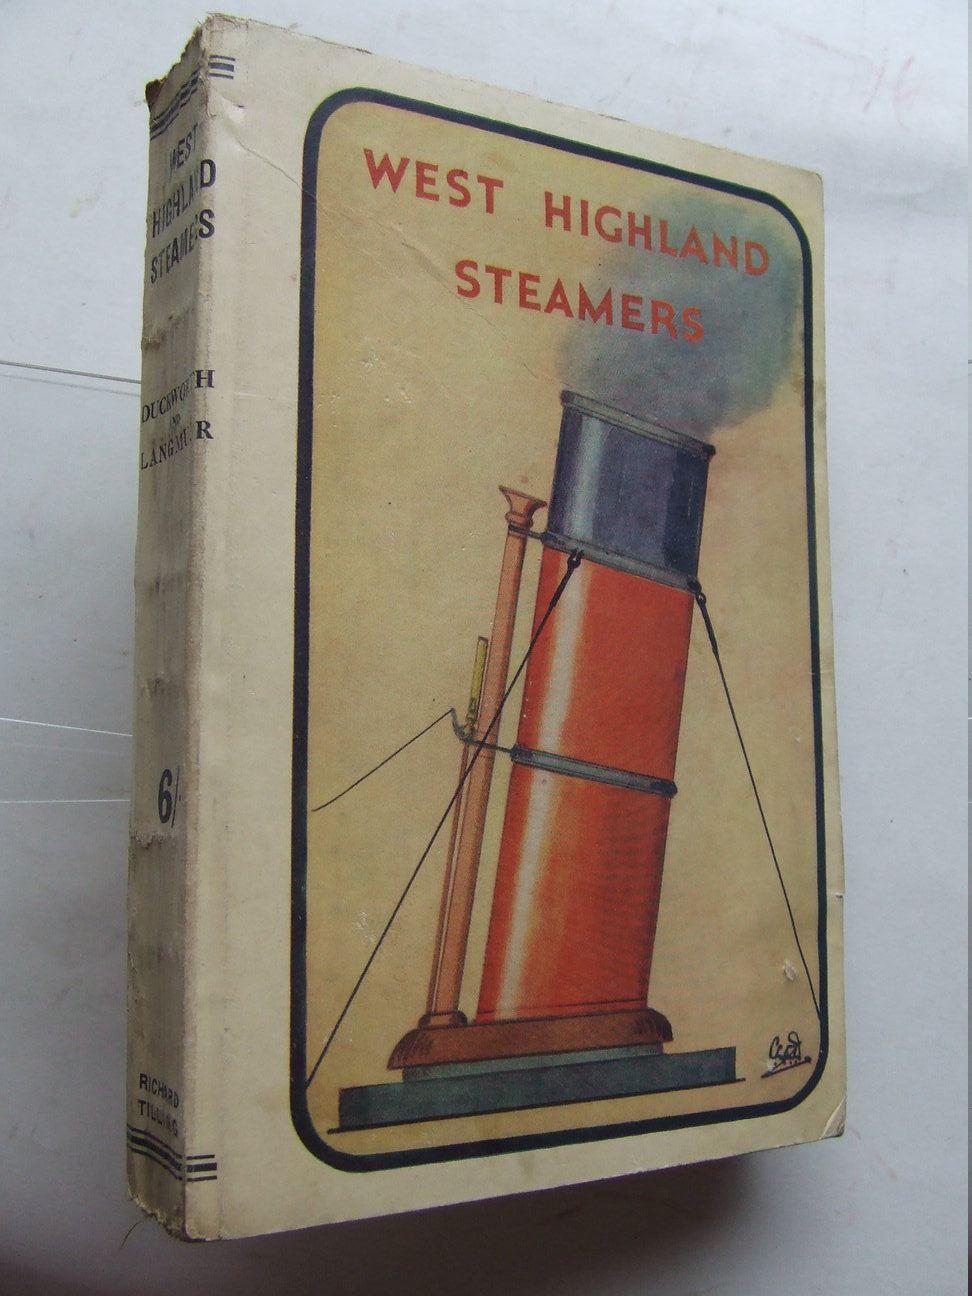 West Highland Steamers. 1st edition